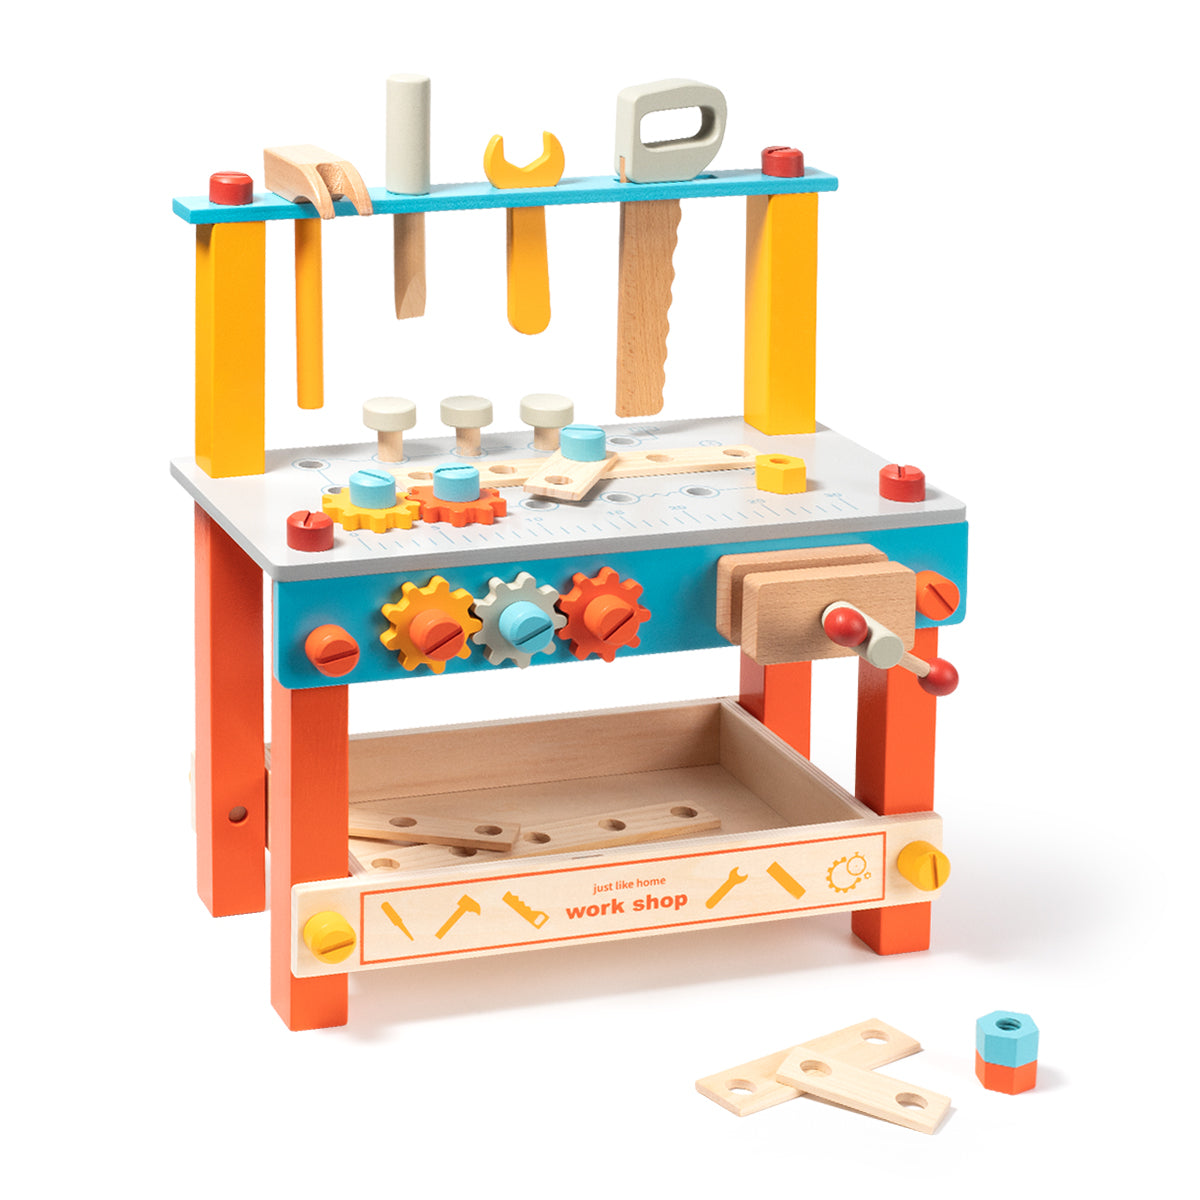 Wooden Tool Workbench Toy for Kids,Great Gifts for orange-solid wood